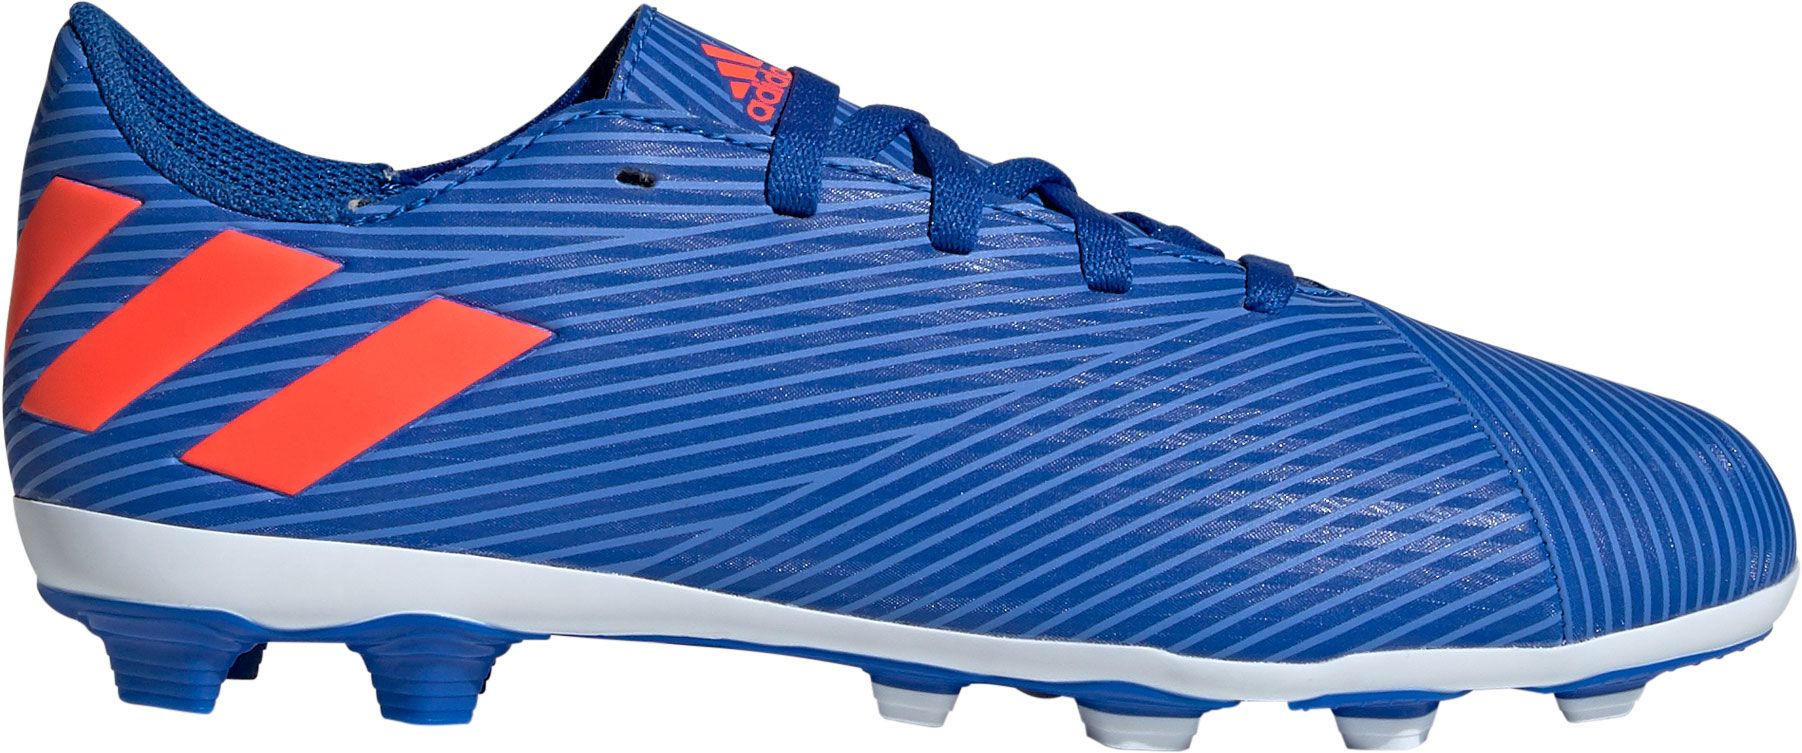 new messi cleats